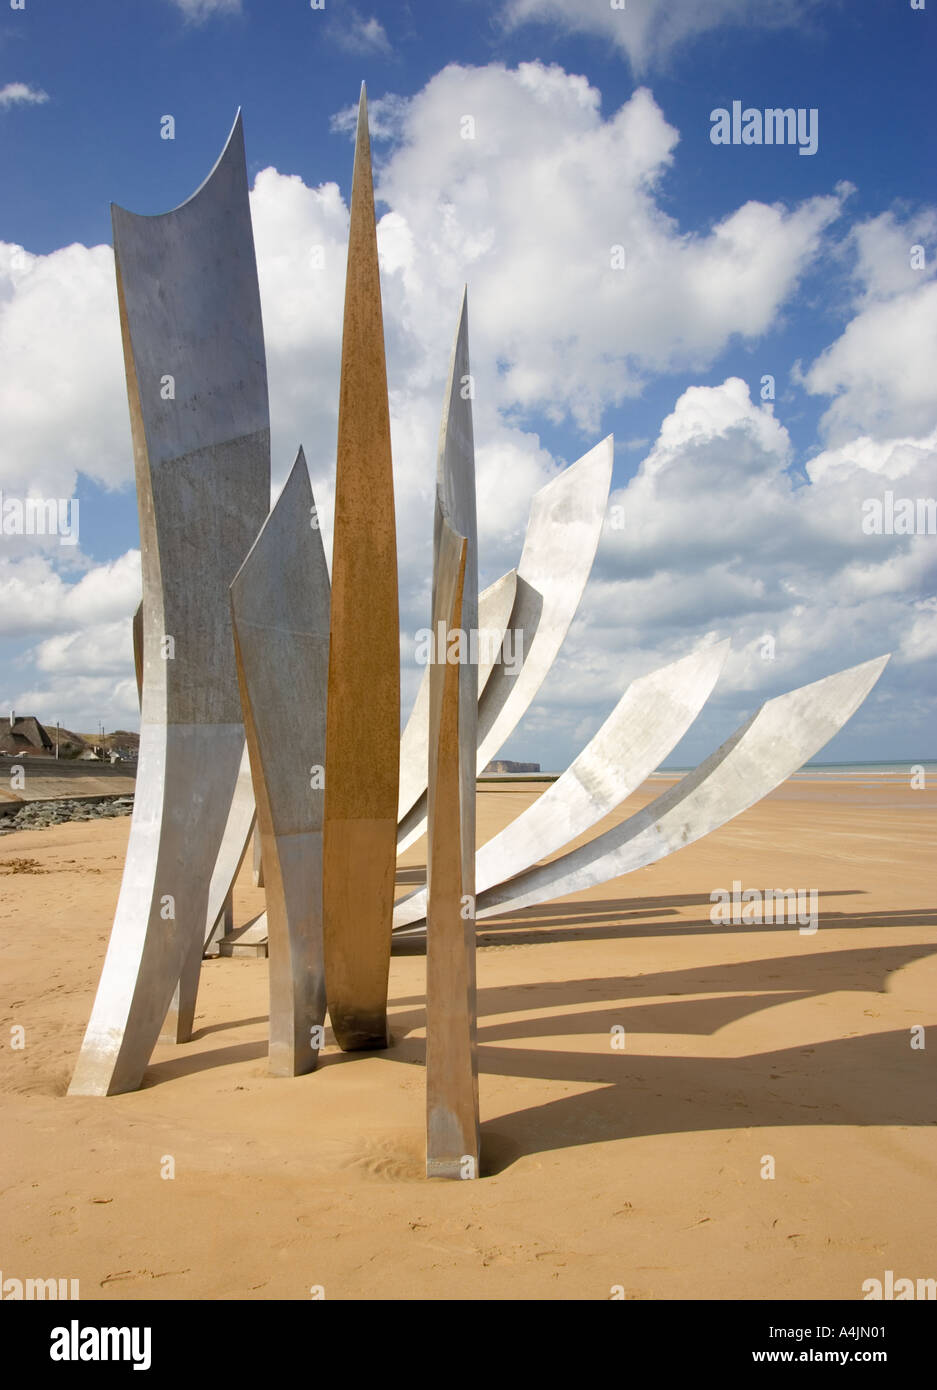 Les Braves D Day World War 2 sculpture at Omaha Beach, Normandy, France, Europe Stock Photo